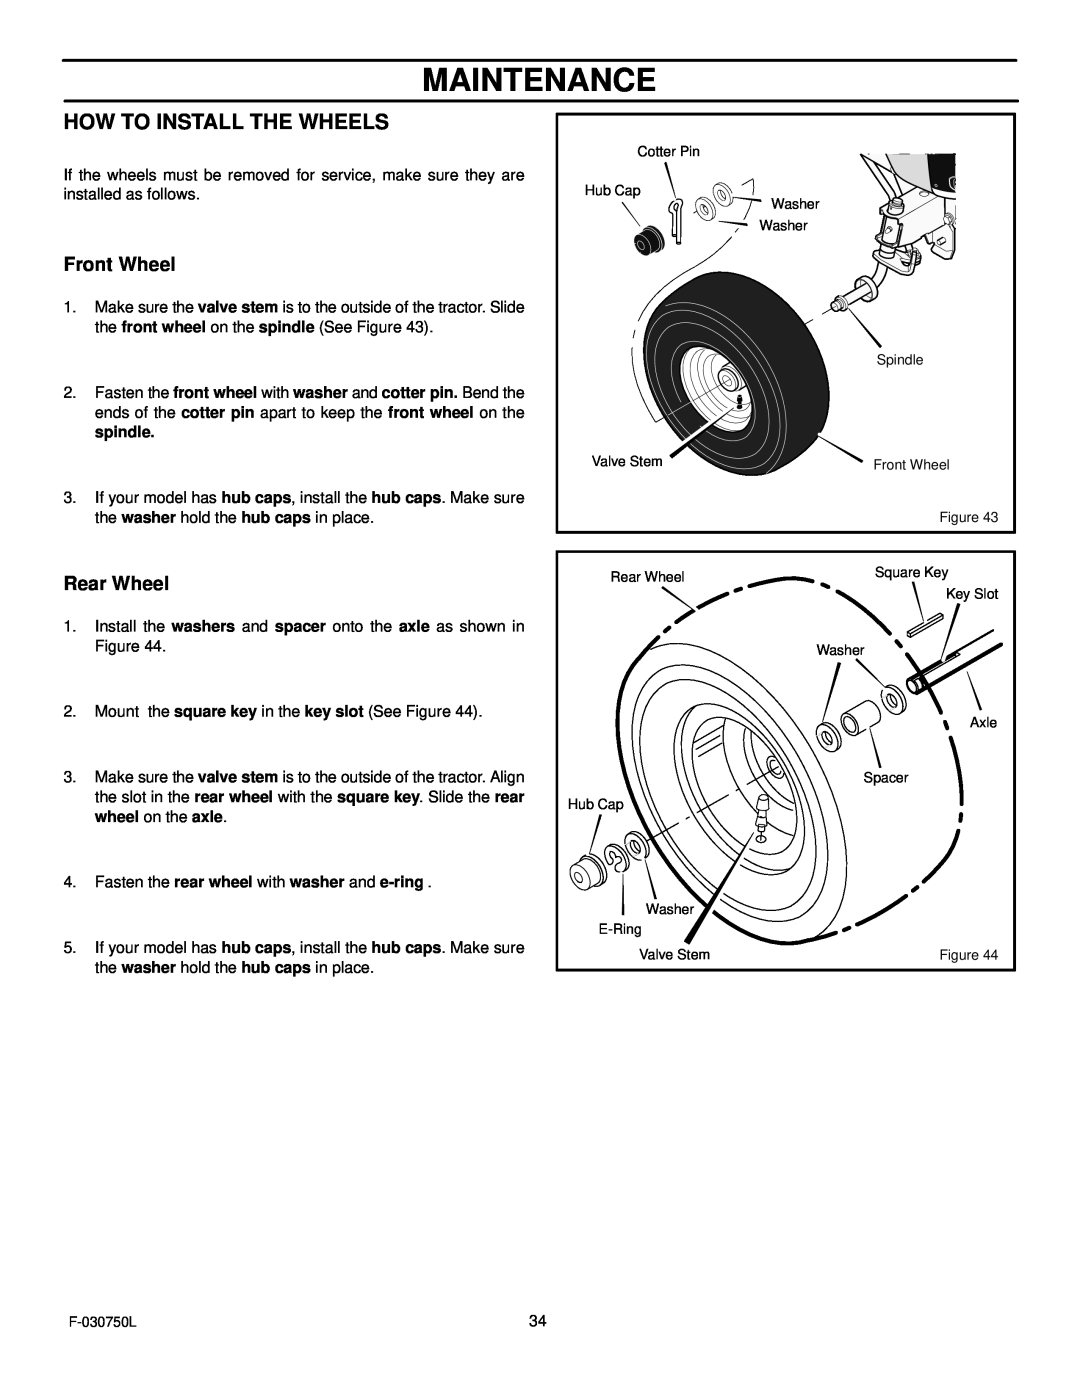 Murray 425306x48A manual Maintenance, How To Install The Wheels, Front Wheel, Rear Wheel 